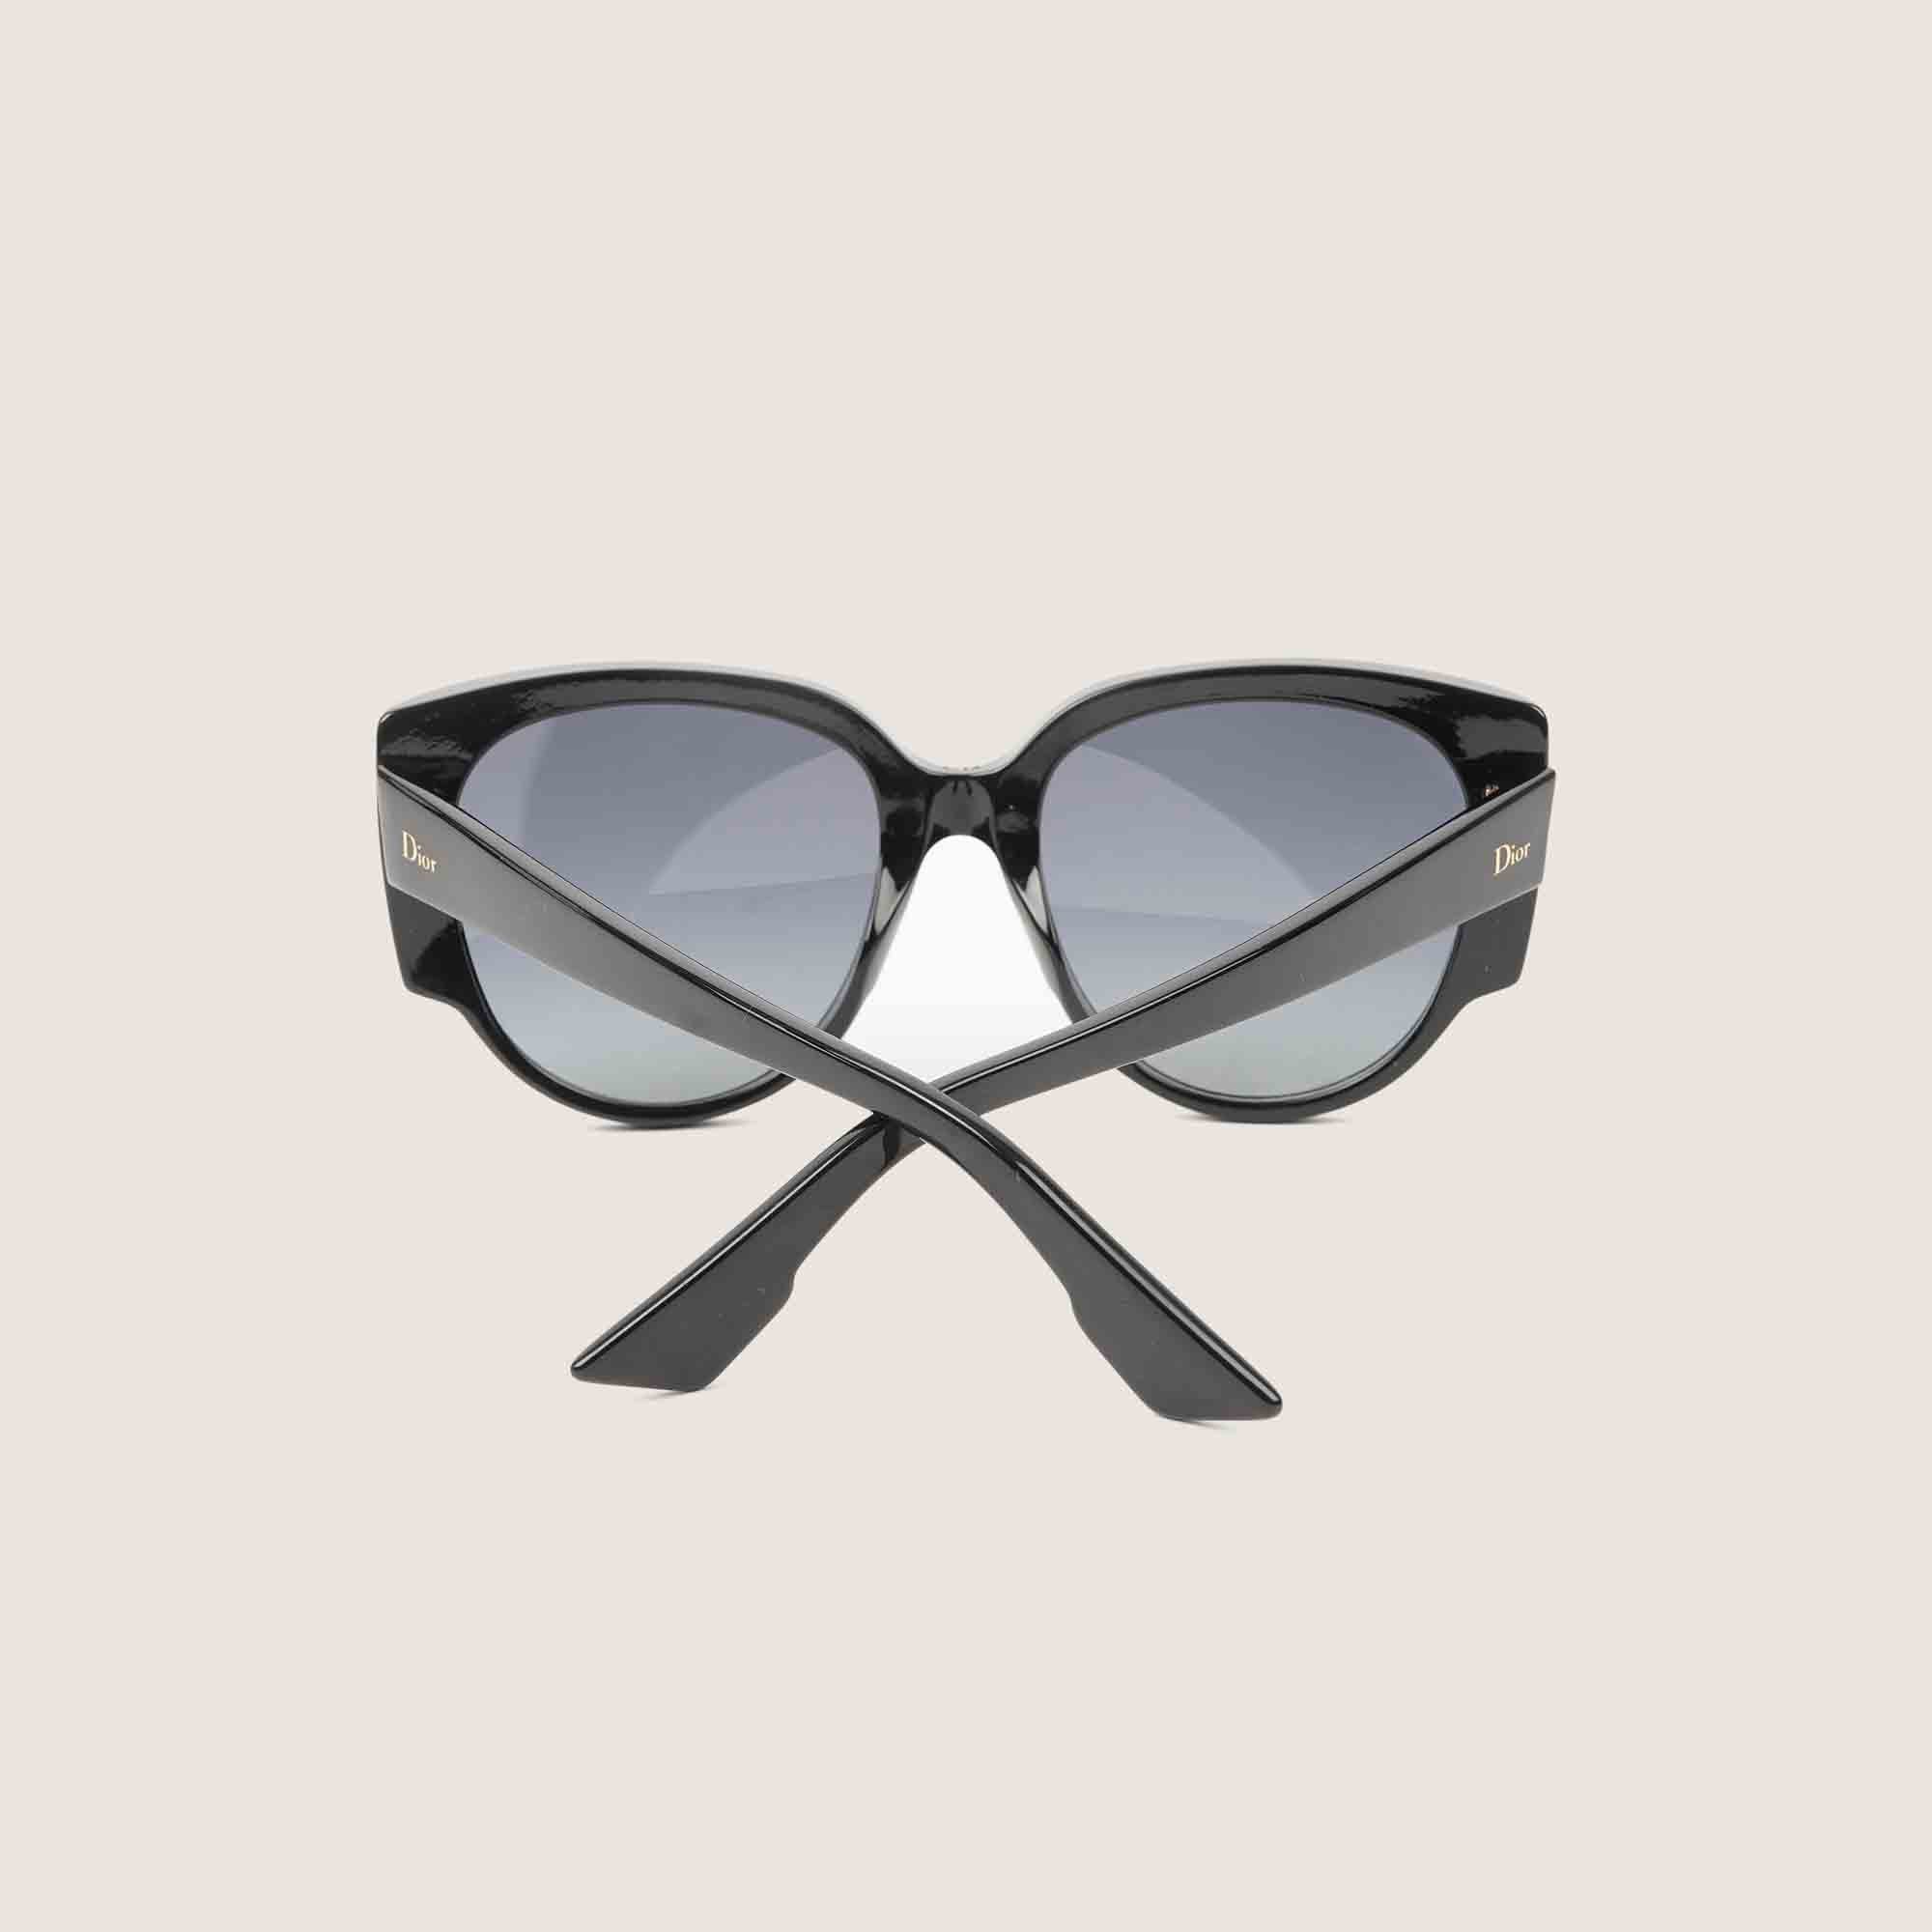 Diornight 1 Sunglasses - CHRISTIAN DIOR - Affordable Luxury image